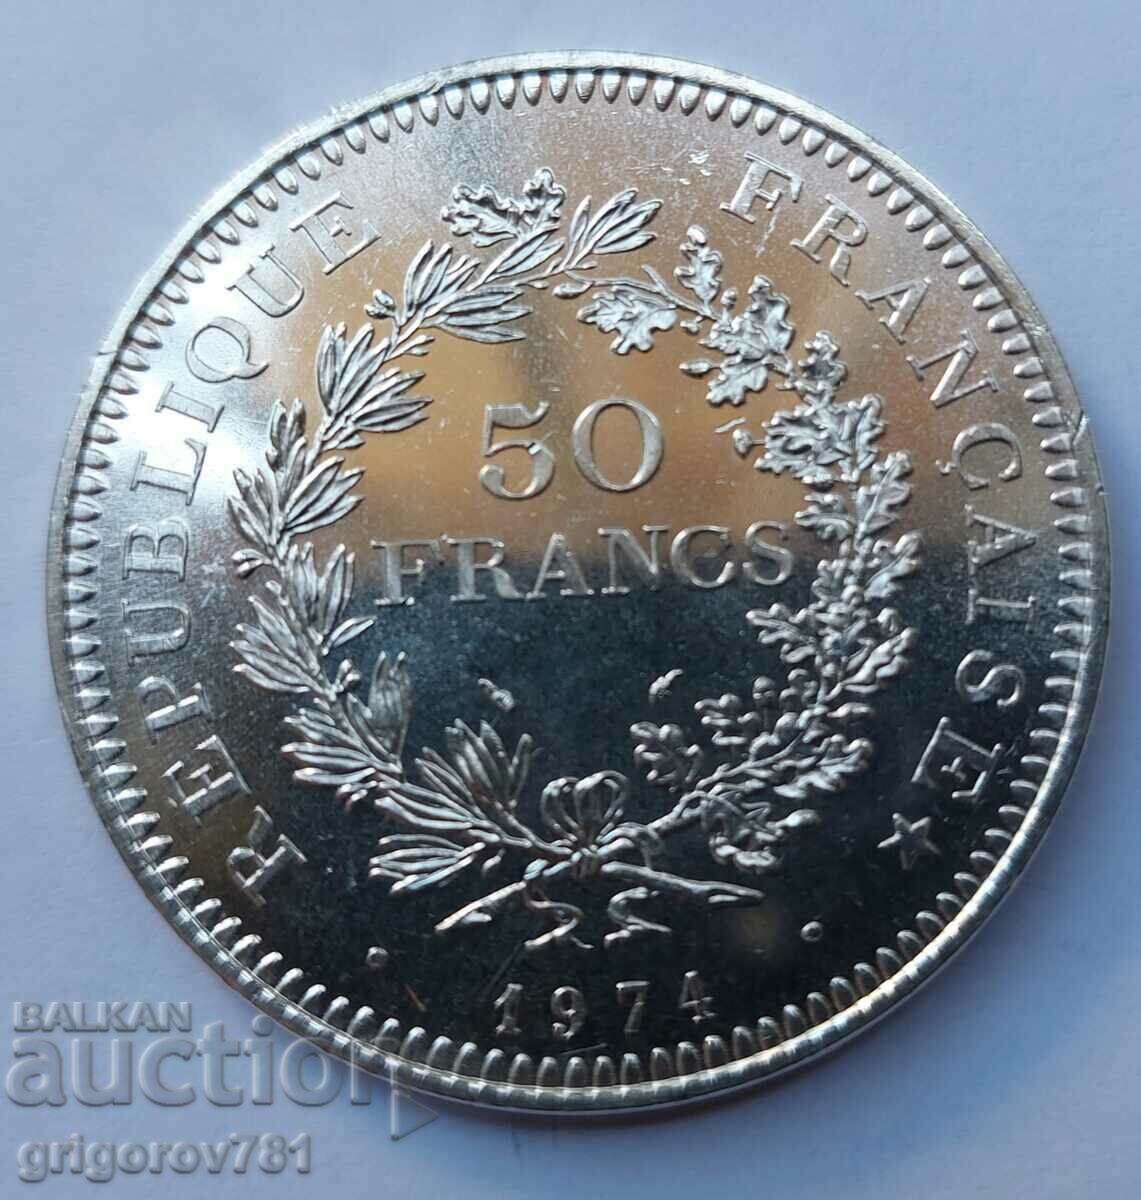 50 Francs Silver France 1974 - Silver Coin #20